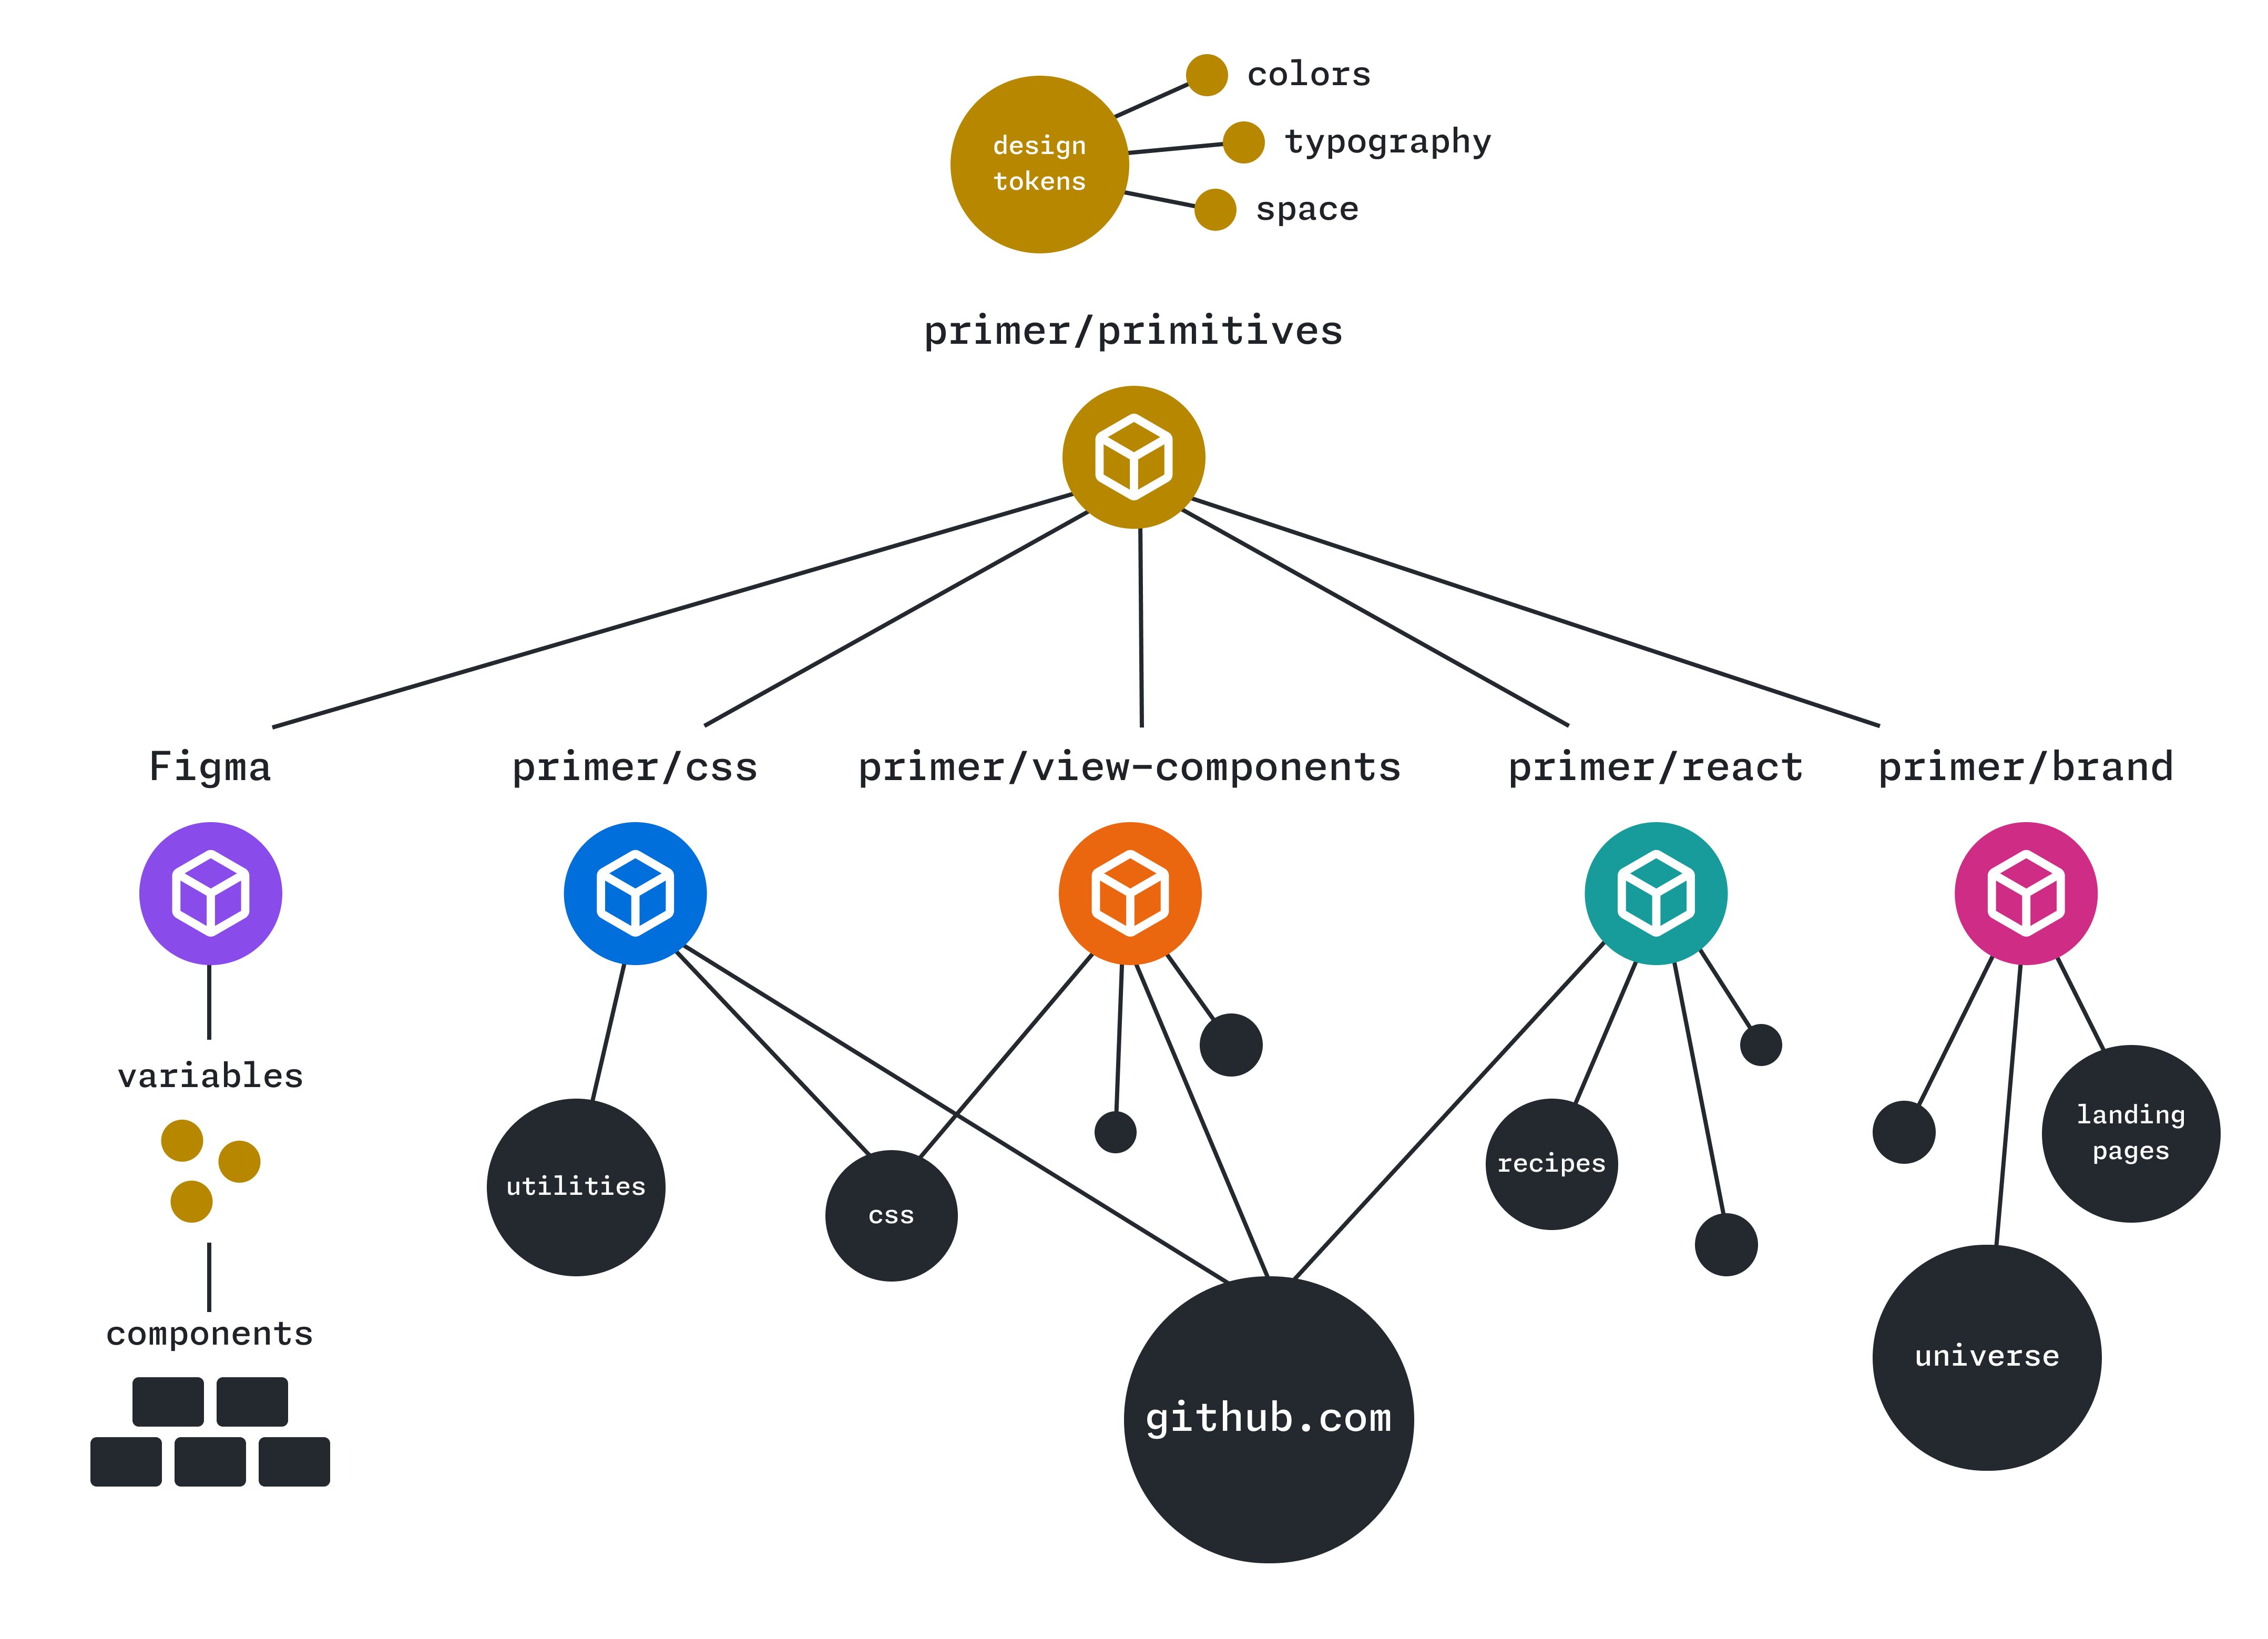 primer primitives diagram showing how the package connects with other primer libraries